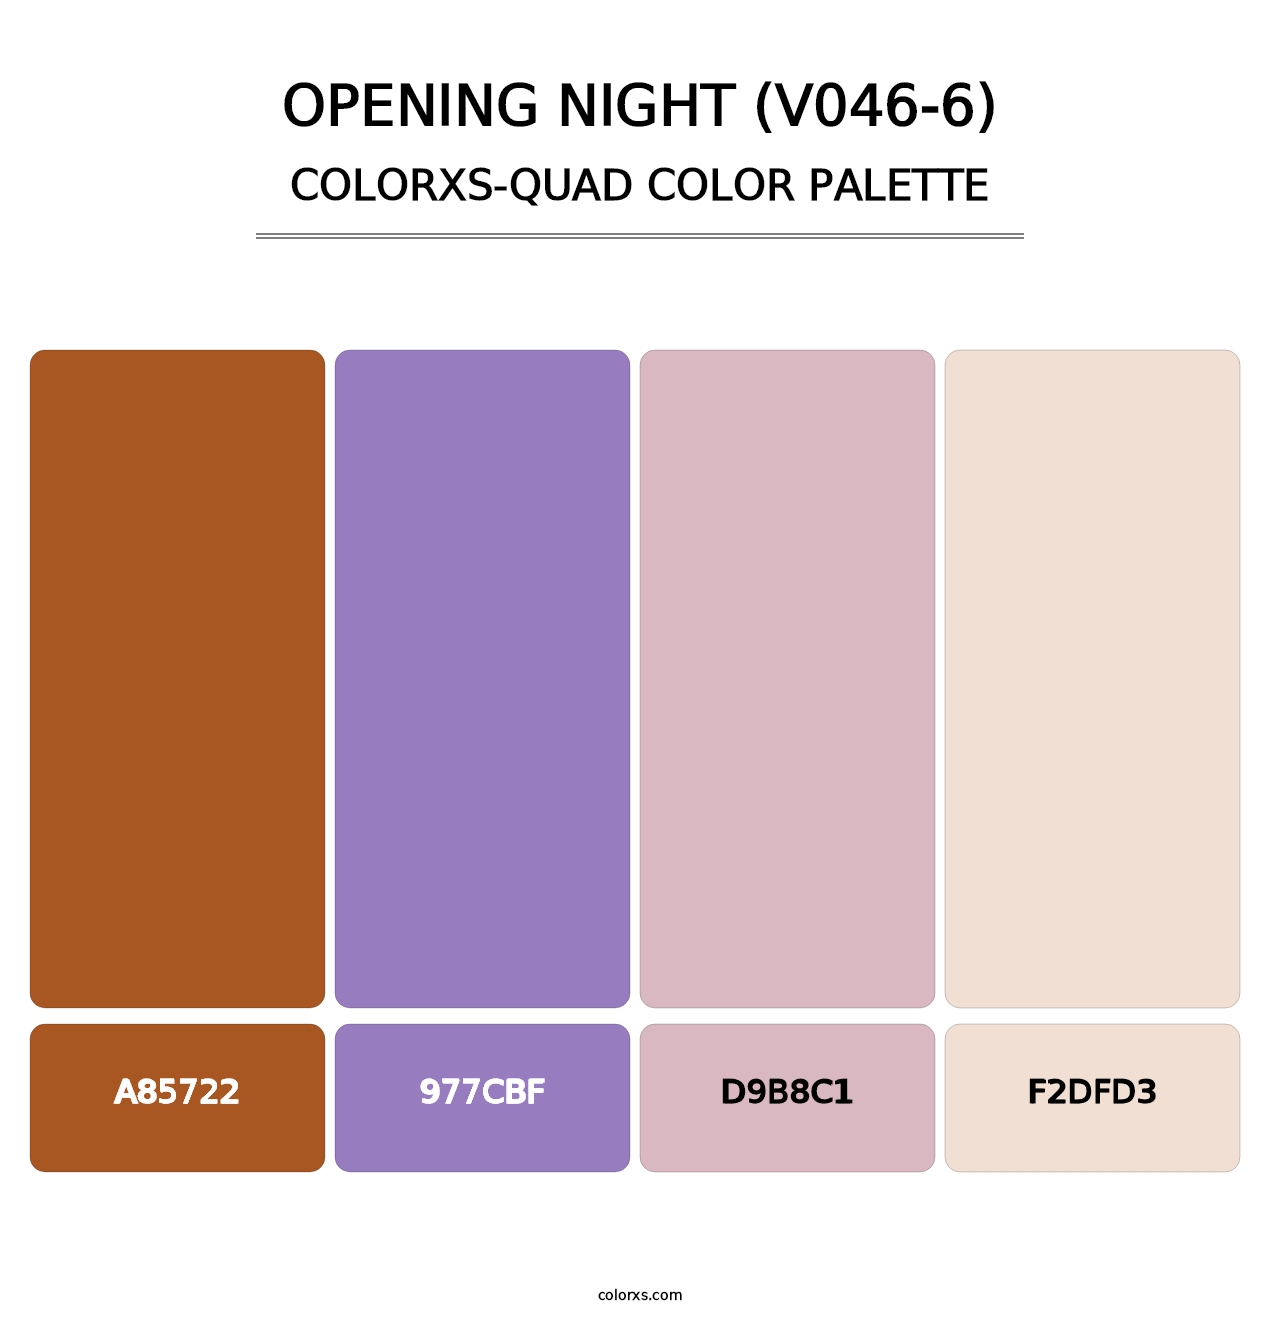 Opening Night (V046-6) - Colorxs Quad Palette